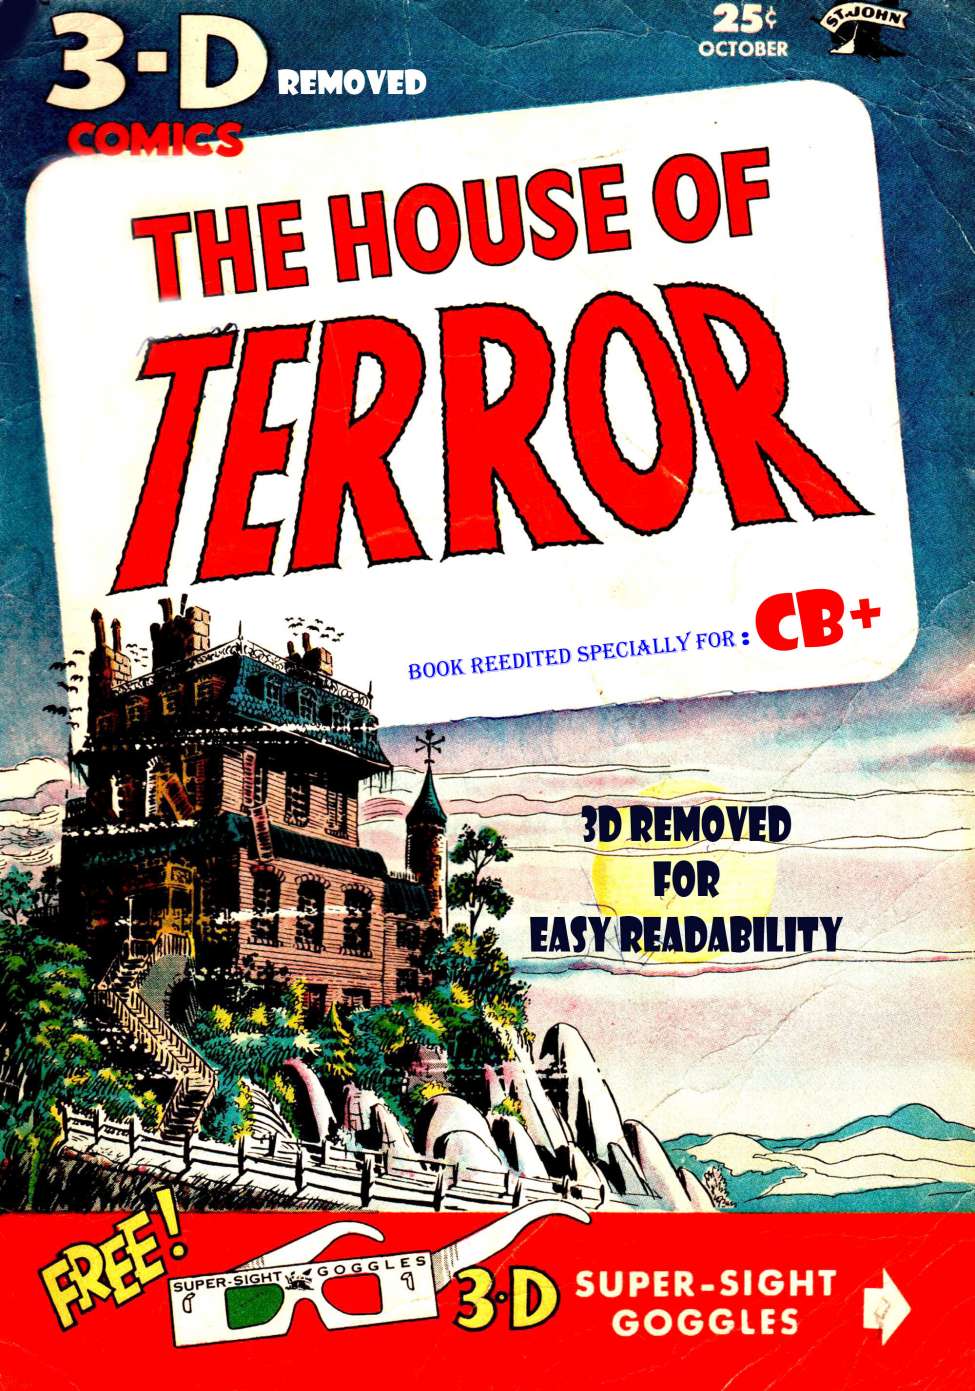 Comic Book Cover For House of Terror 1 (With 3D Removed) - Version 5